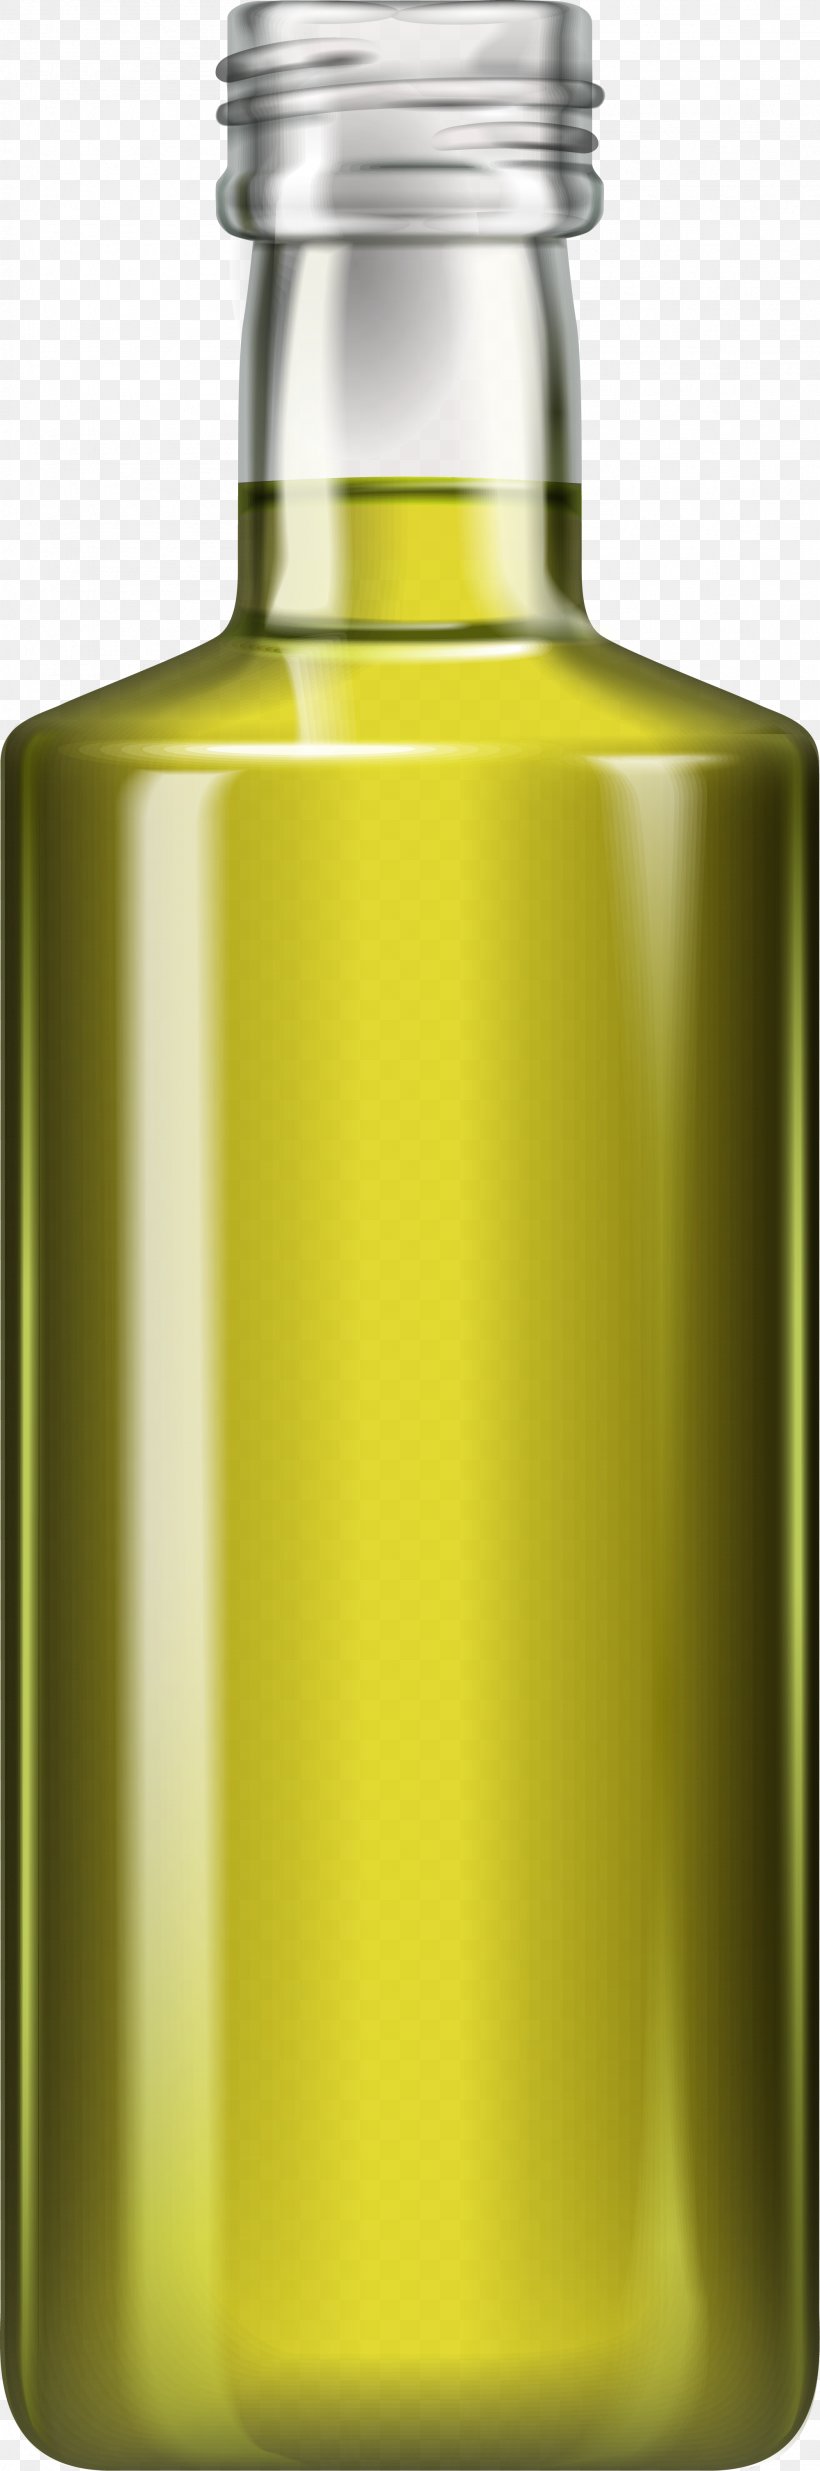 Olive Oil Sunflower Oil Bottle, PNG, 2001x6032px, Oil, Barware, Bottle, Cooking Oil, Essential Oil Download Free